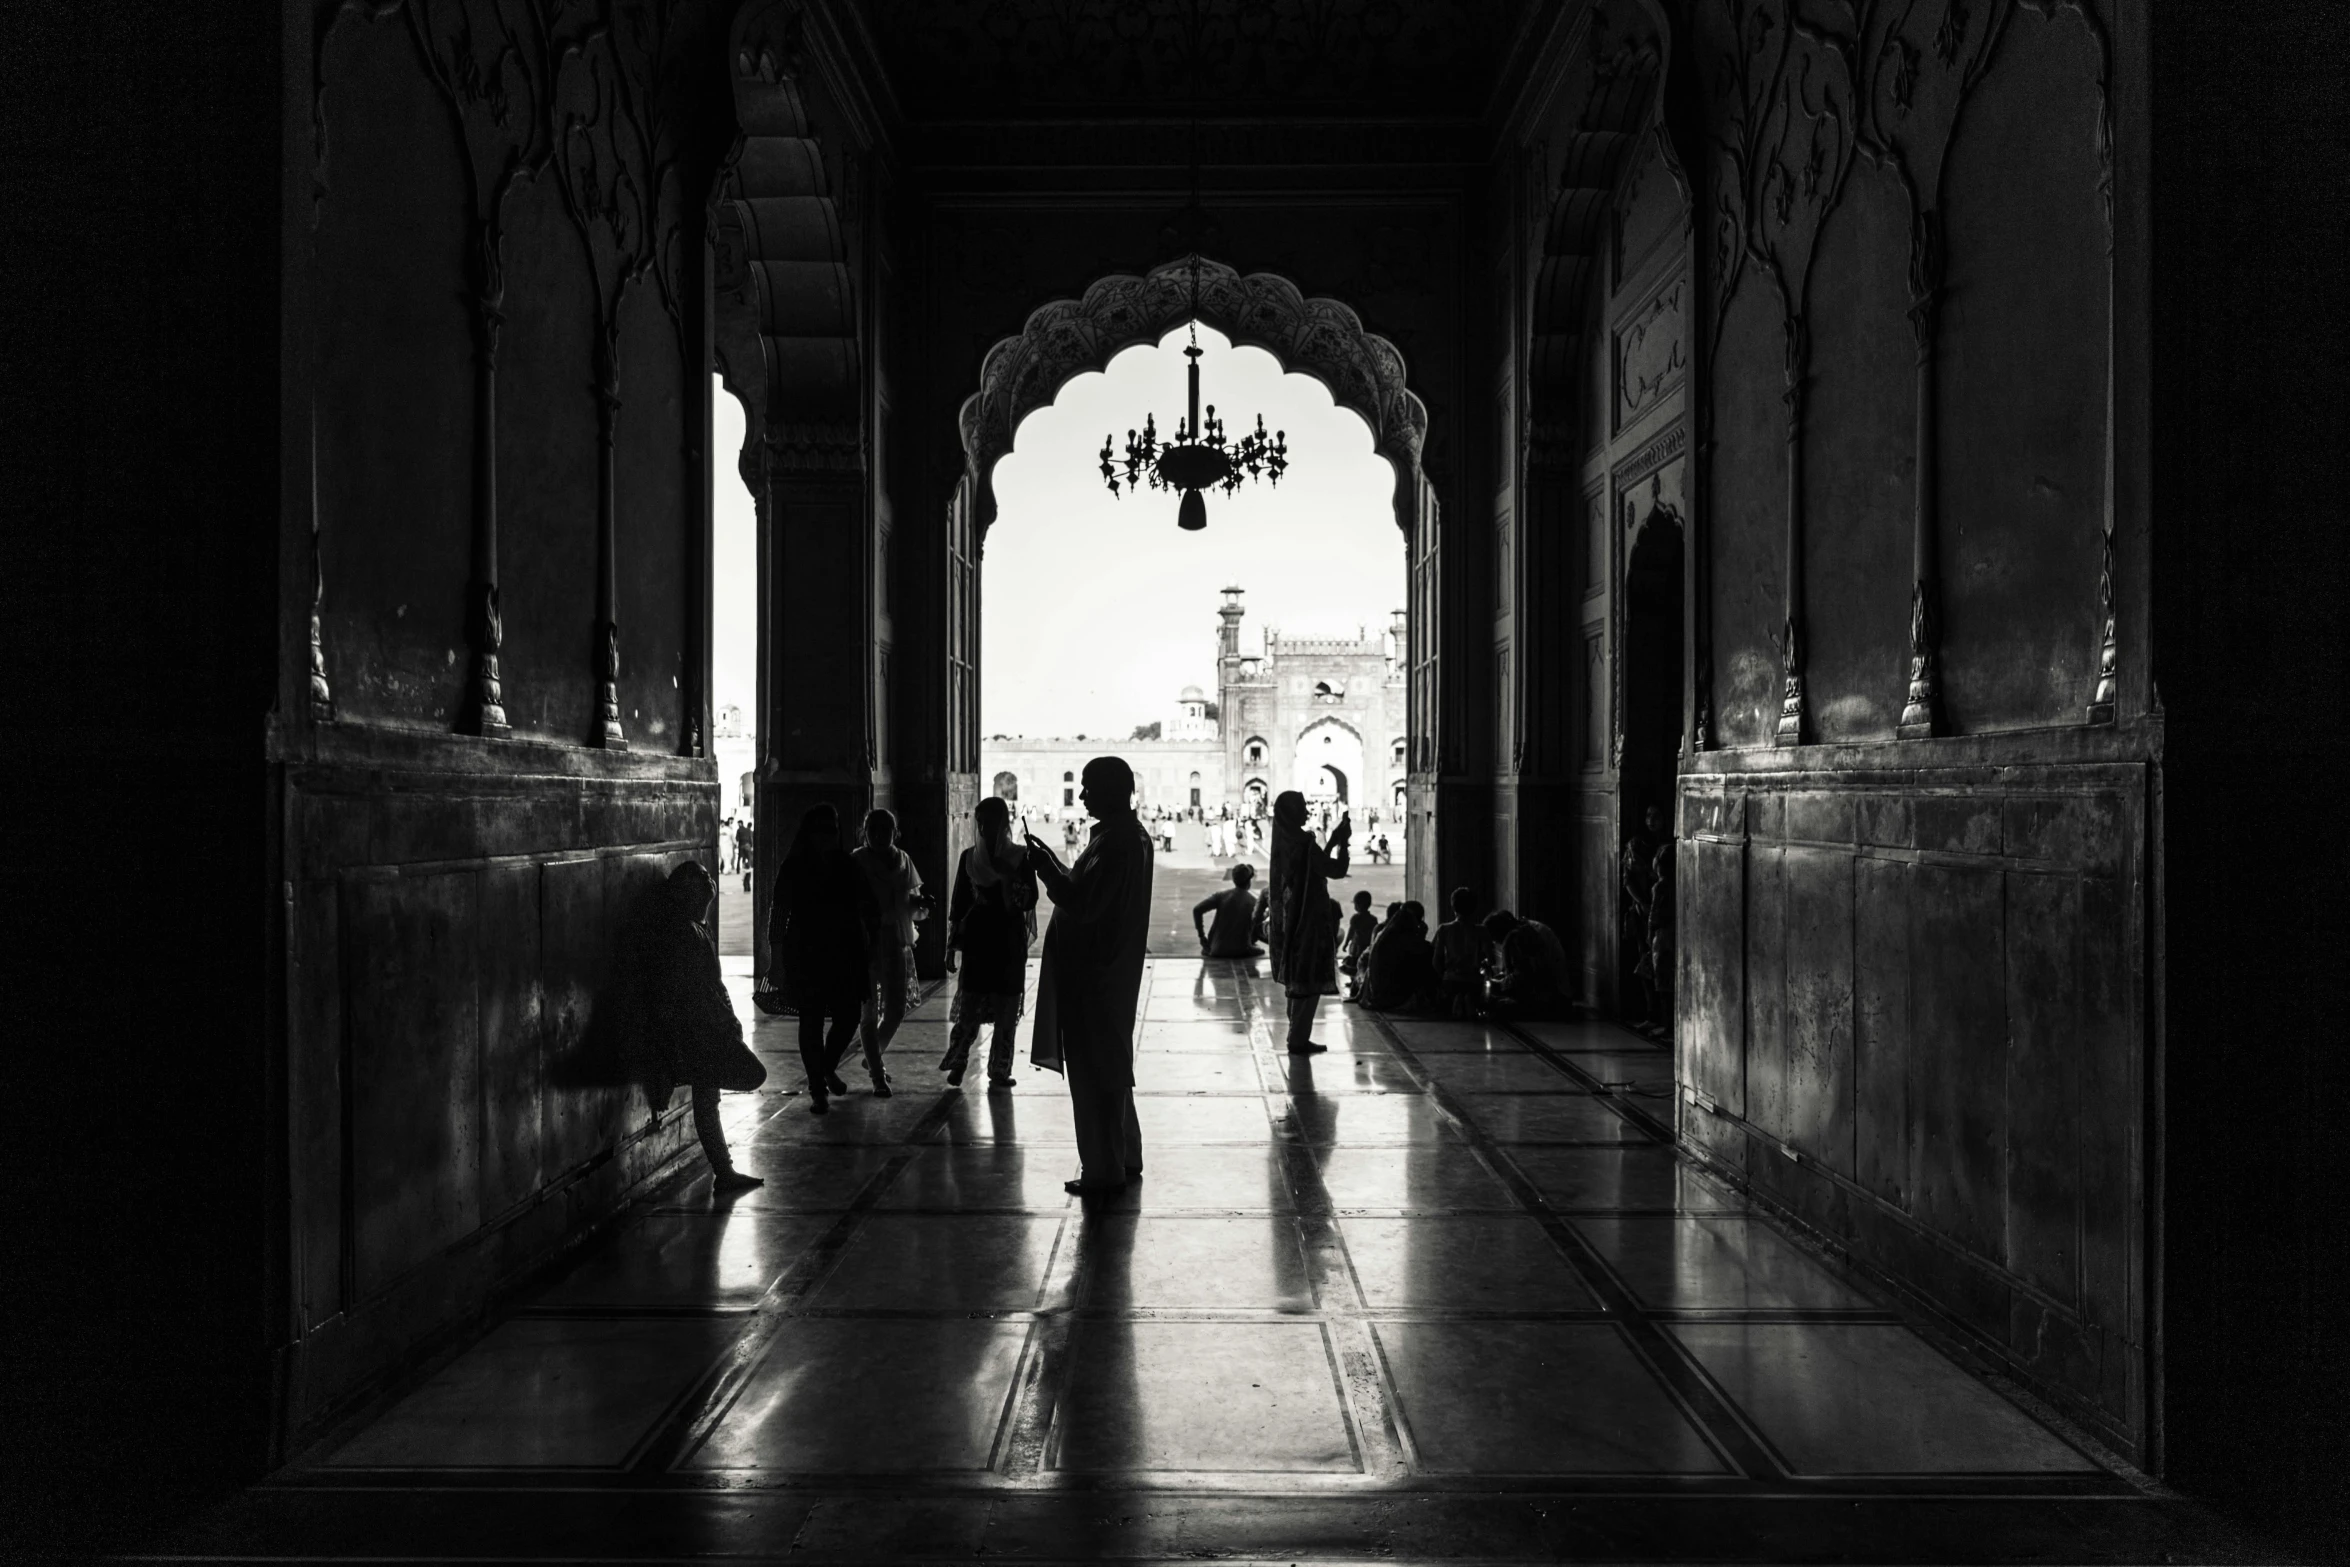 some people are standing under an archway looking towards a light